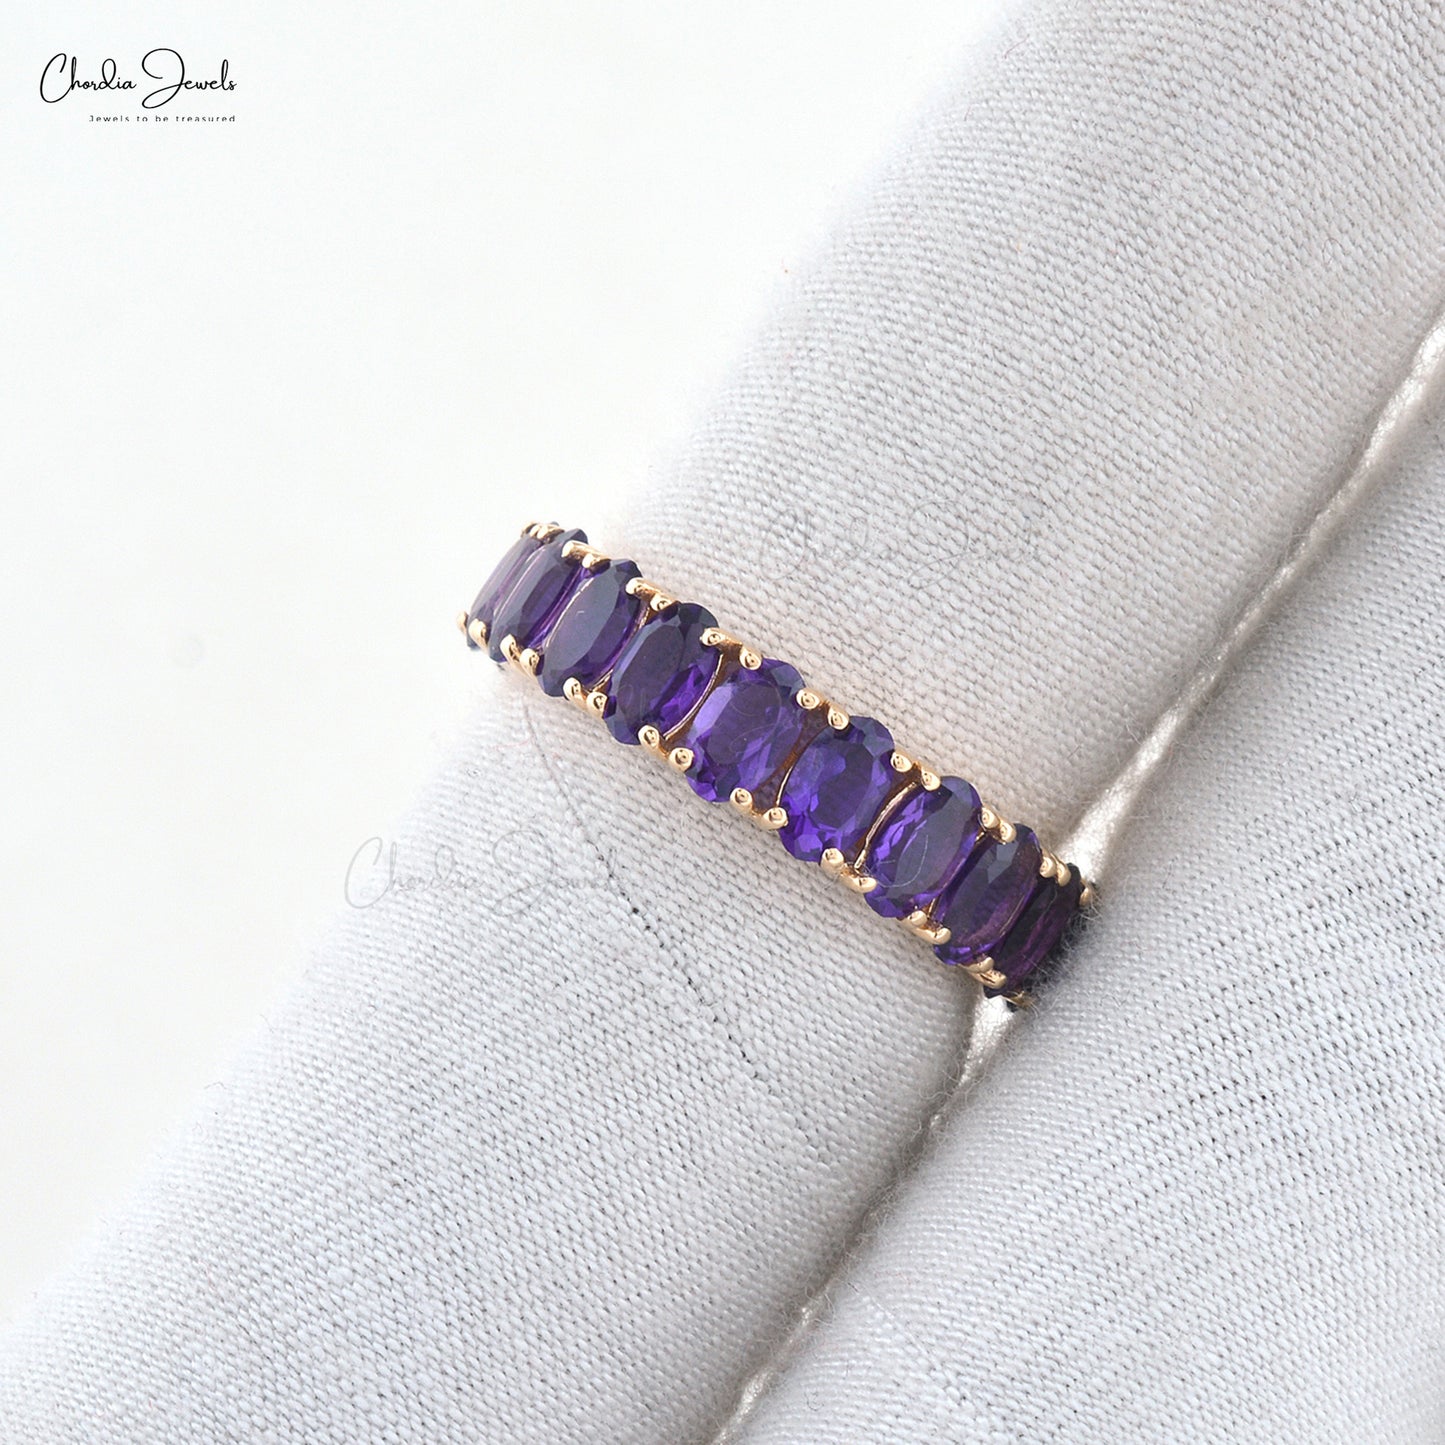 Exquisite 14k Real Rose Gold Eternity Band Genuine Amethyst Gemstone Shared Prong Ring